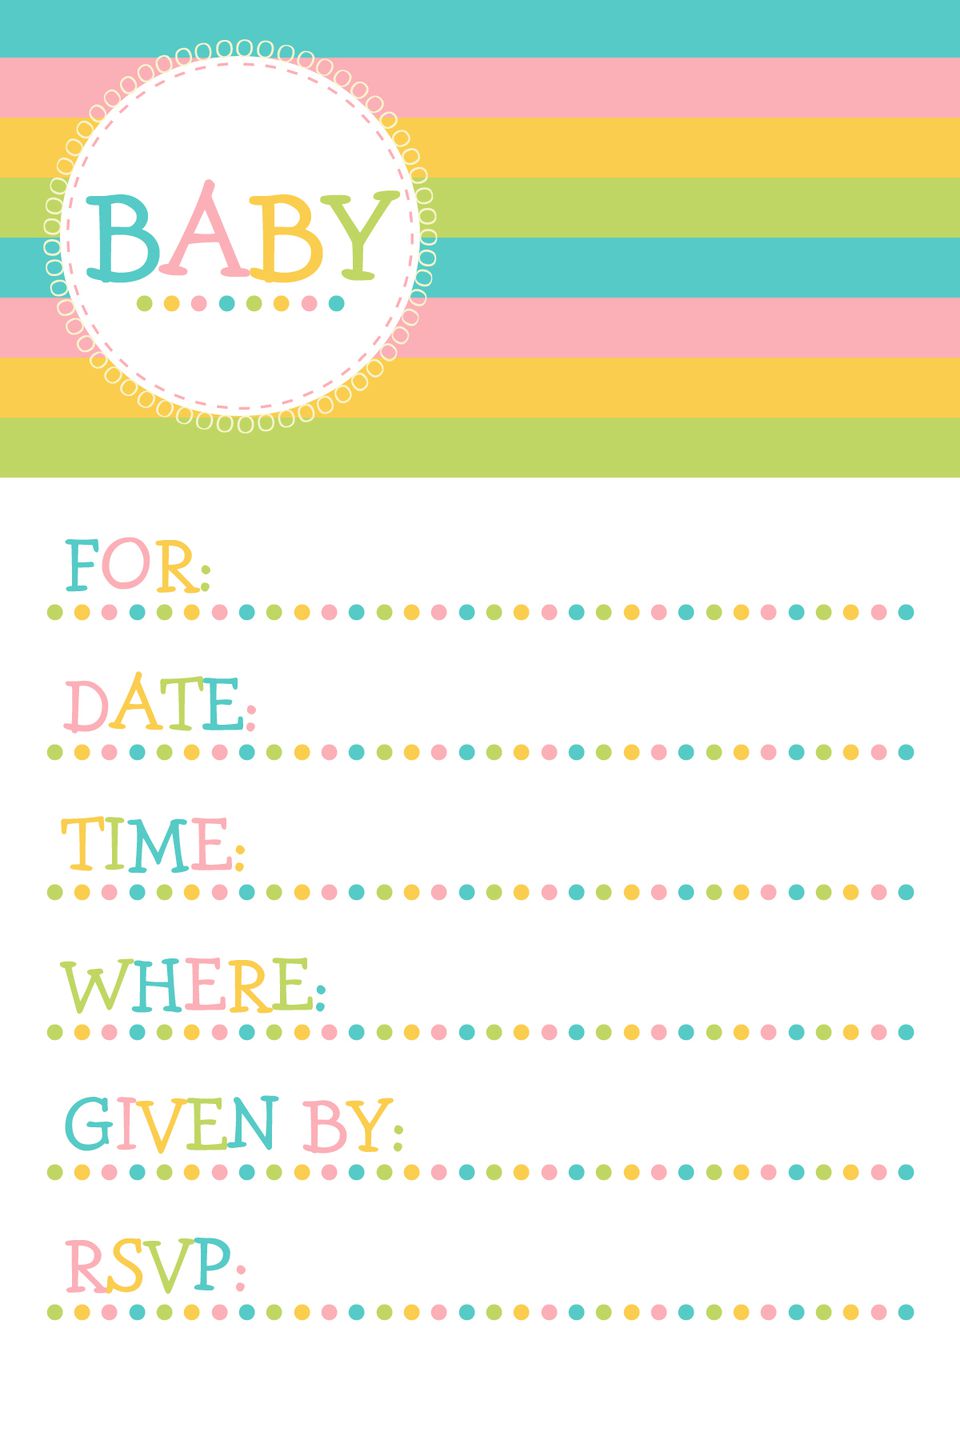 Full Size of Baby Shower:cheap Invitations Baby Shower Pinterest Baby Shower Ideas For Girls Baby Girl Themed Showers Pinterest Nursery Ideas Elegant Baby Shower All Star Baby Shower Unique Baby Shower Decorations Girl Baby Shower Decorations